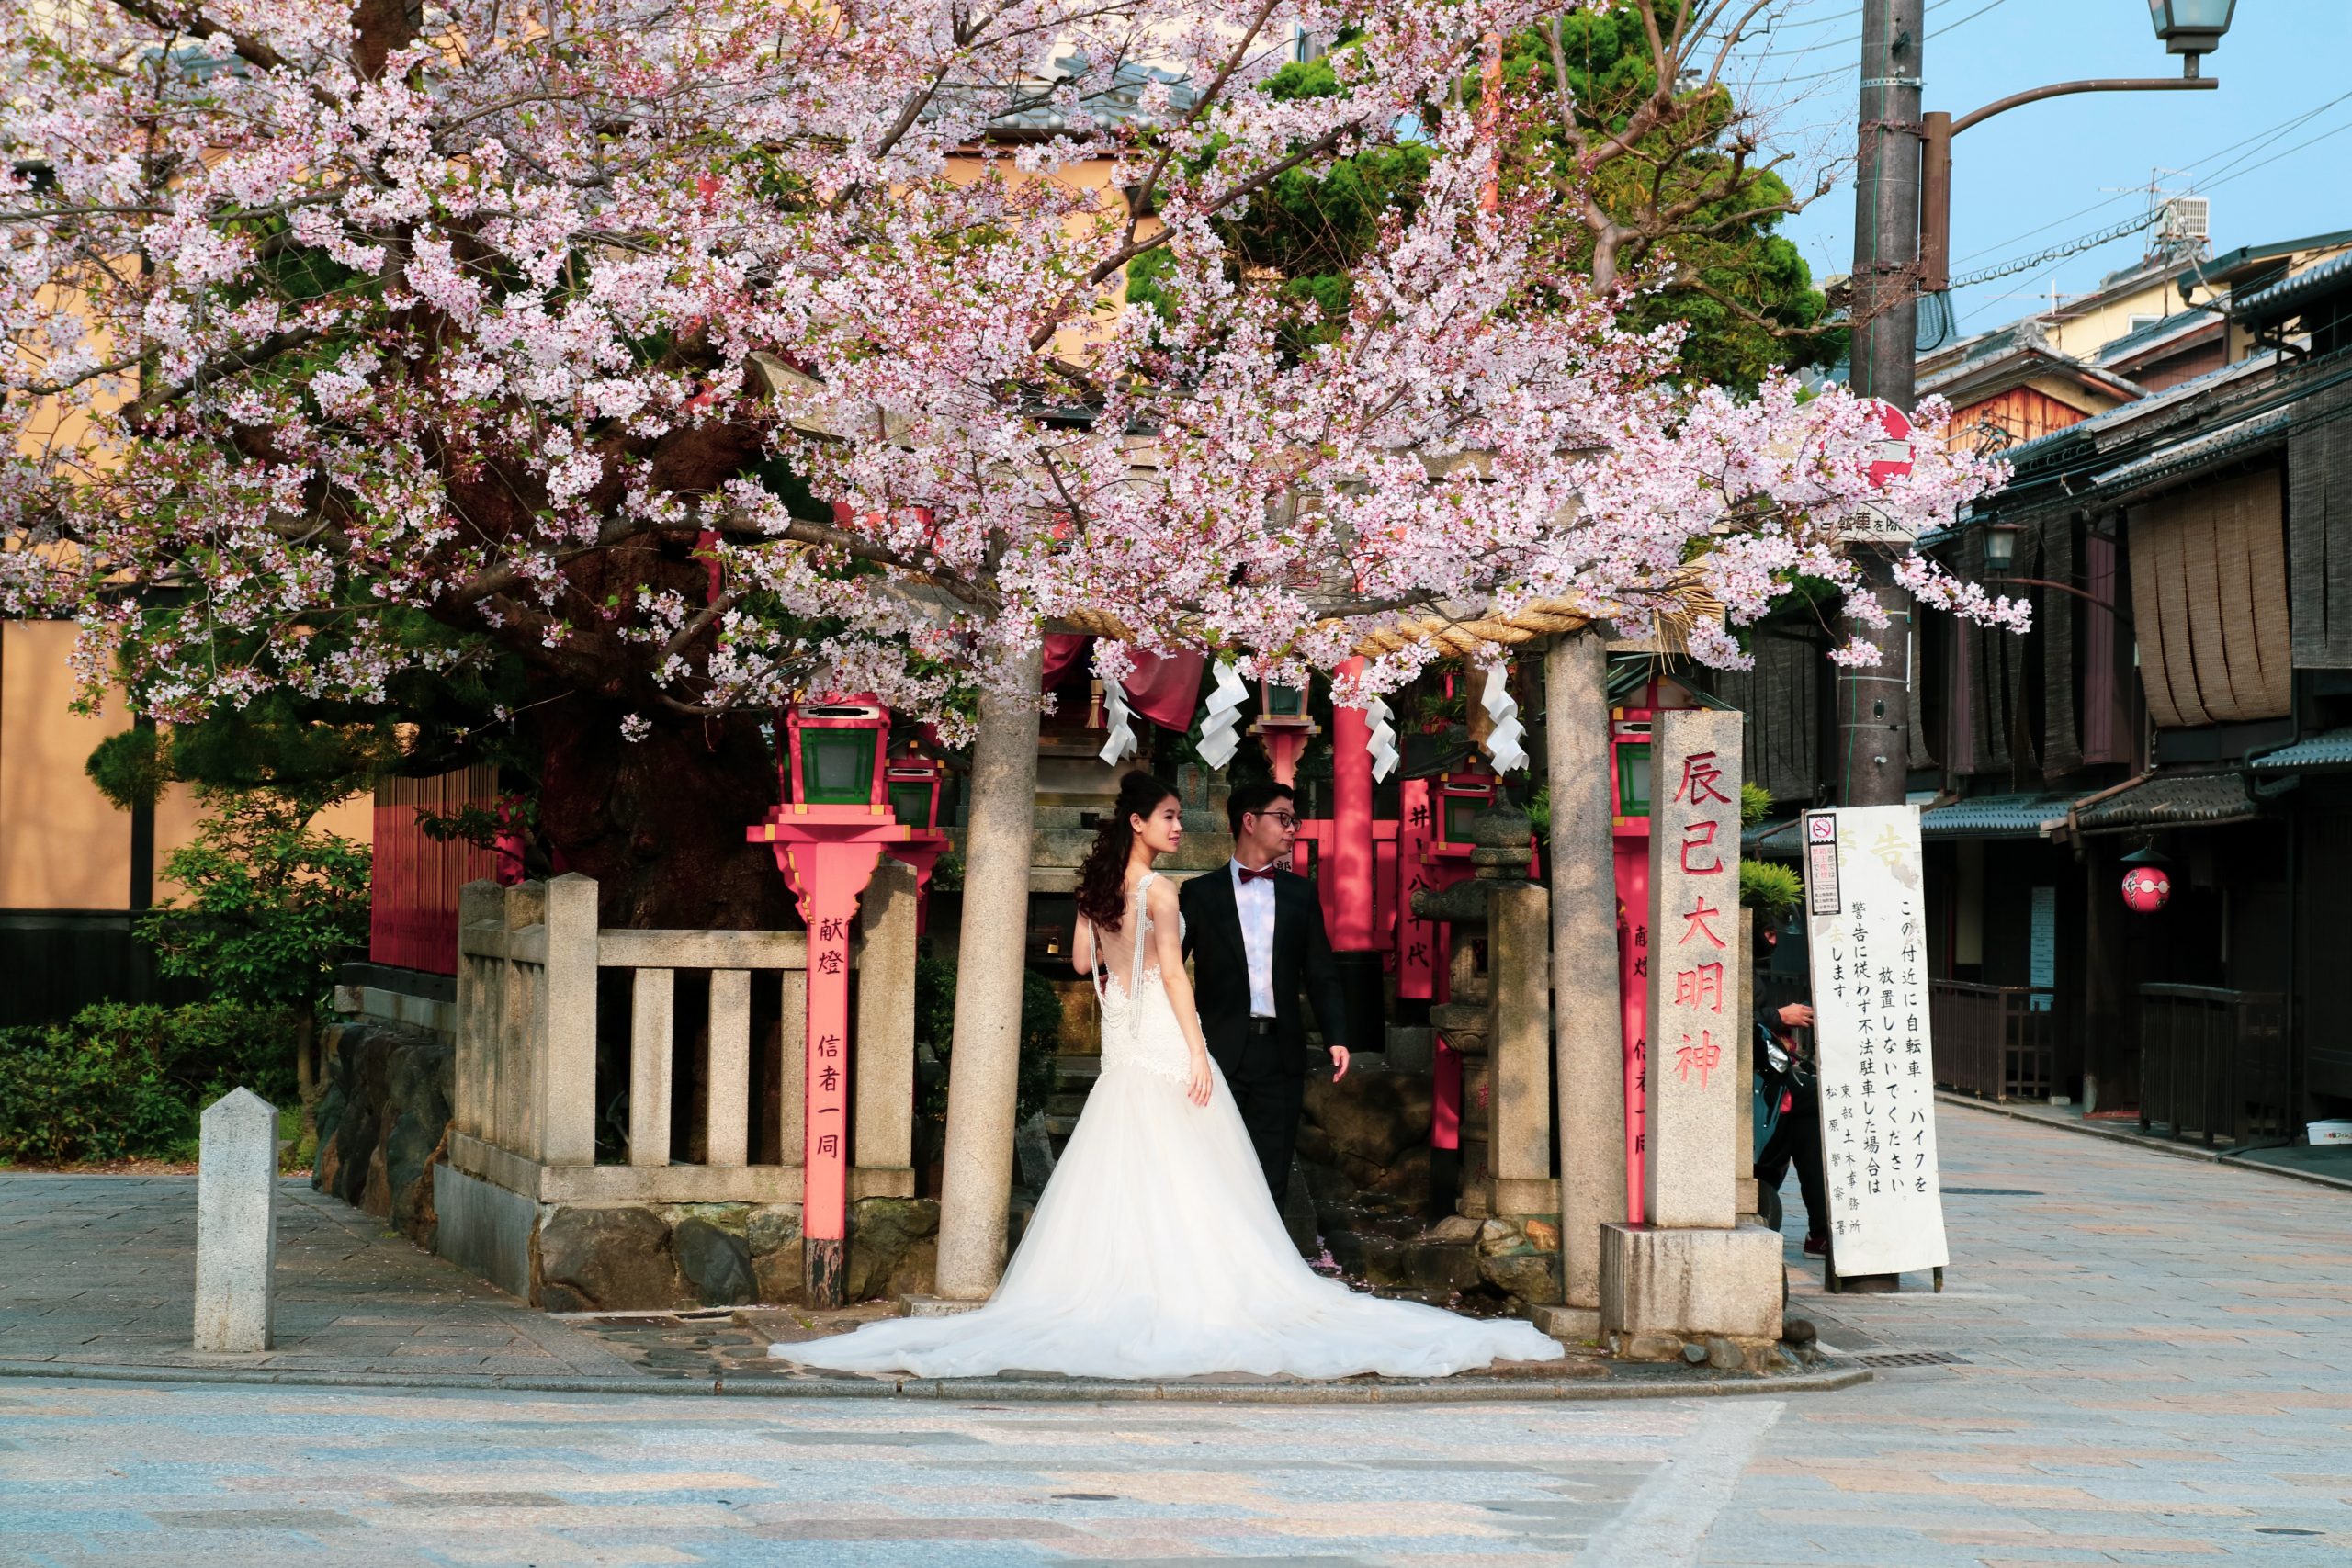 Newlywed standing under cherry blossoms.